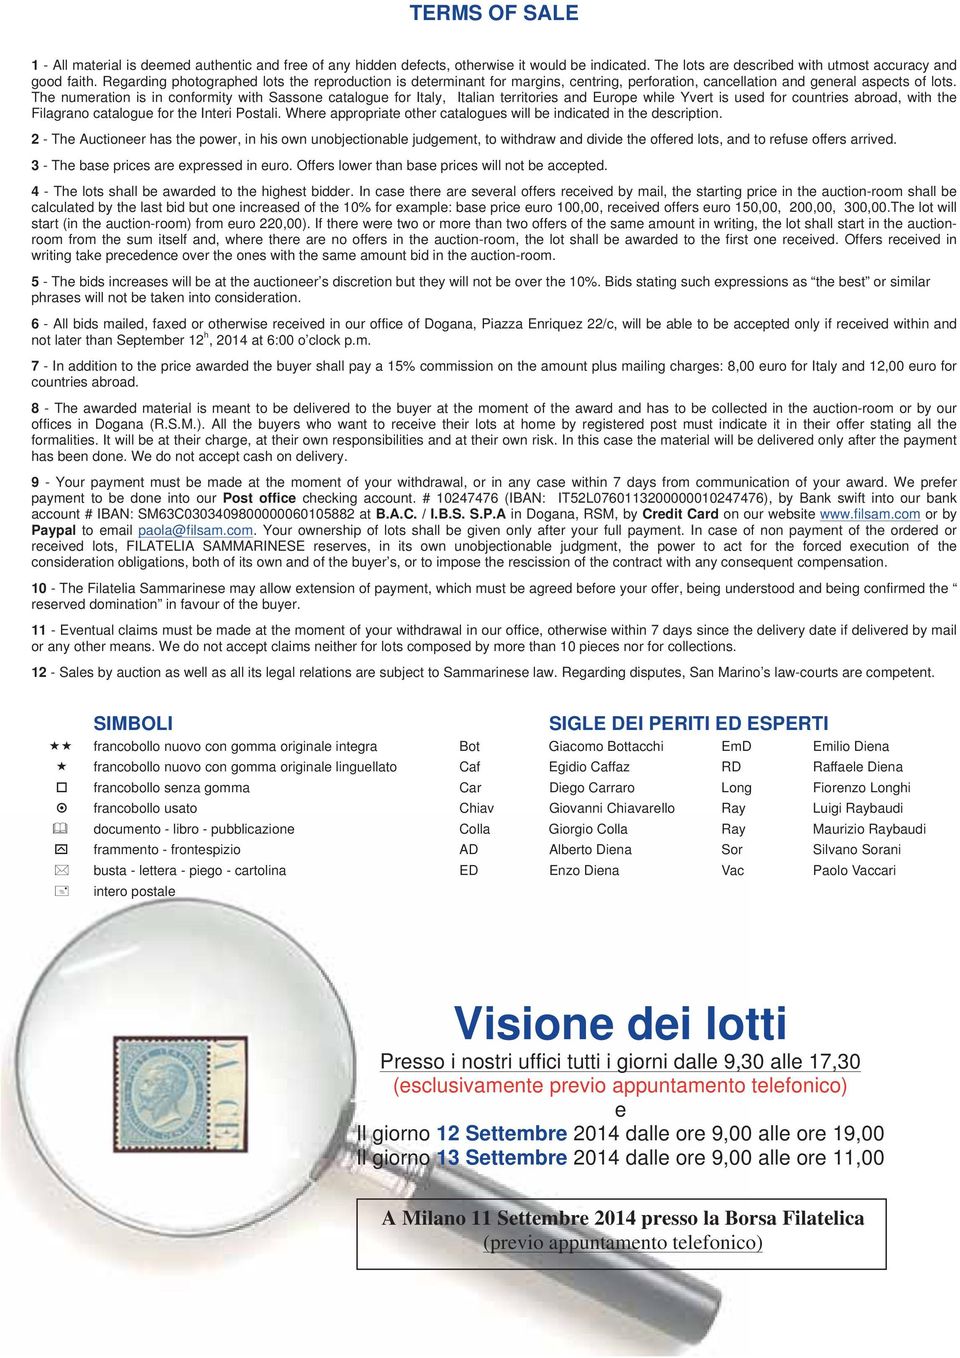 The numeration is in conformity with Sassone catalogue for Italy, Italian territories and Europe while Yvert is used for countries abroad, with the Filagrano catalogue for the Interi Postali.